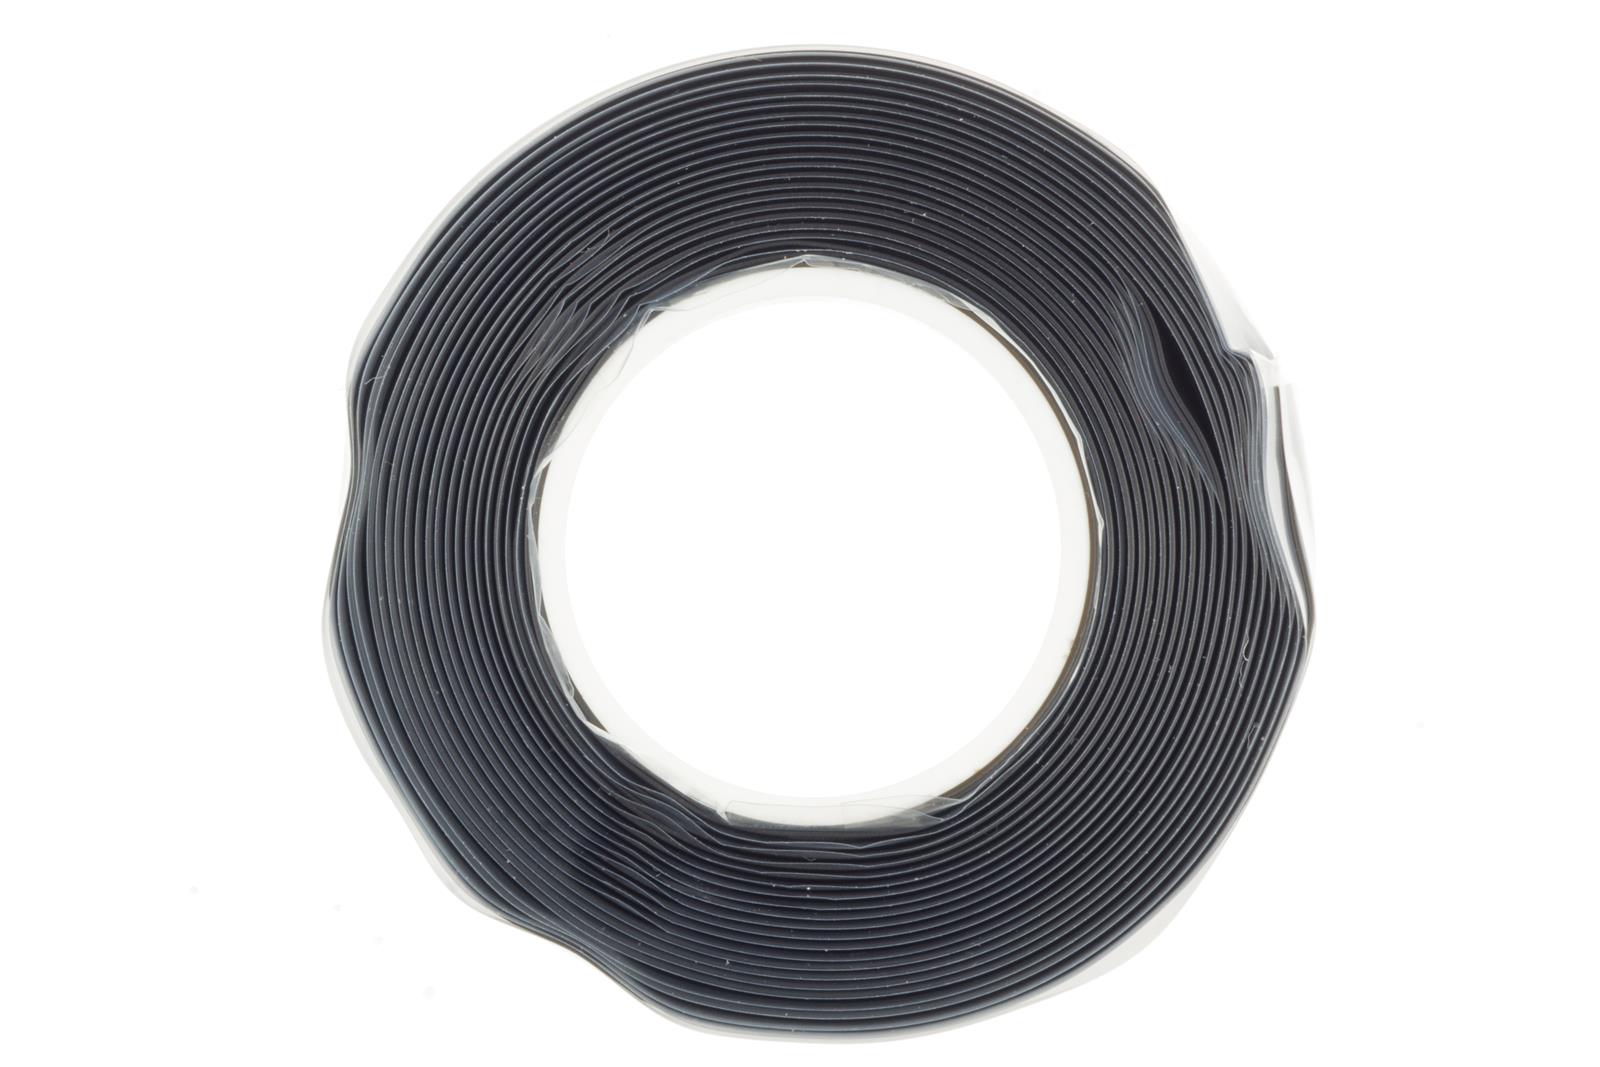 Redhorse Performance 244-2 Black Self-Fusing Silicone Tape 1 in. x 10 ft.